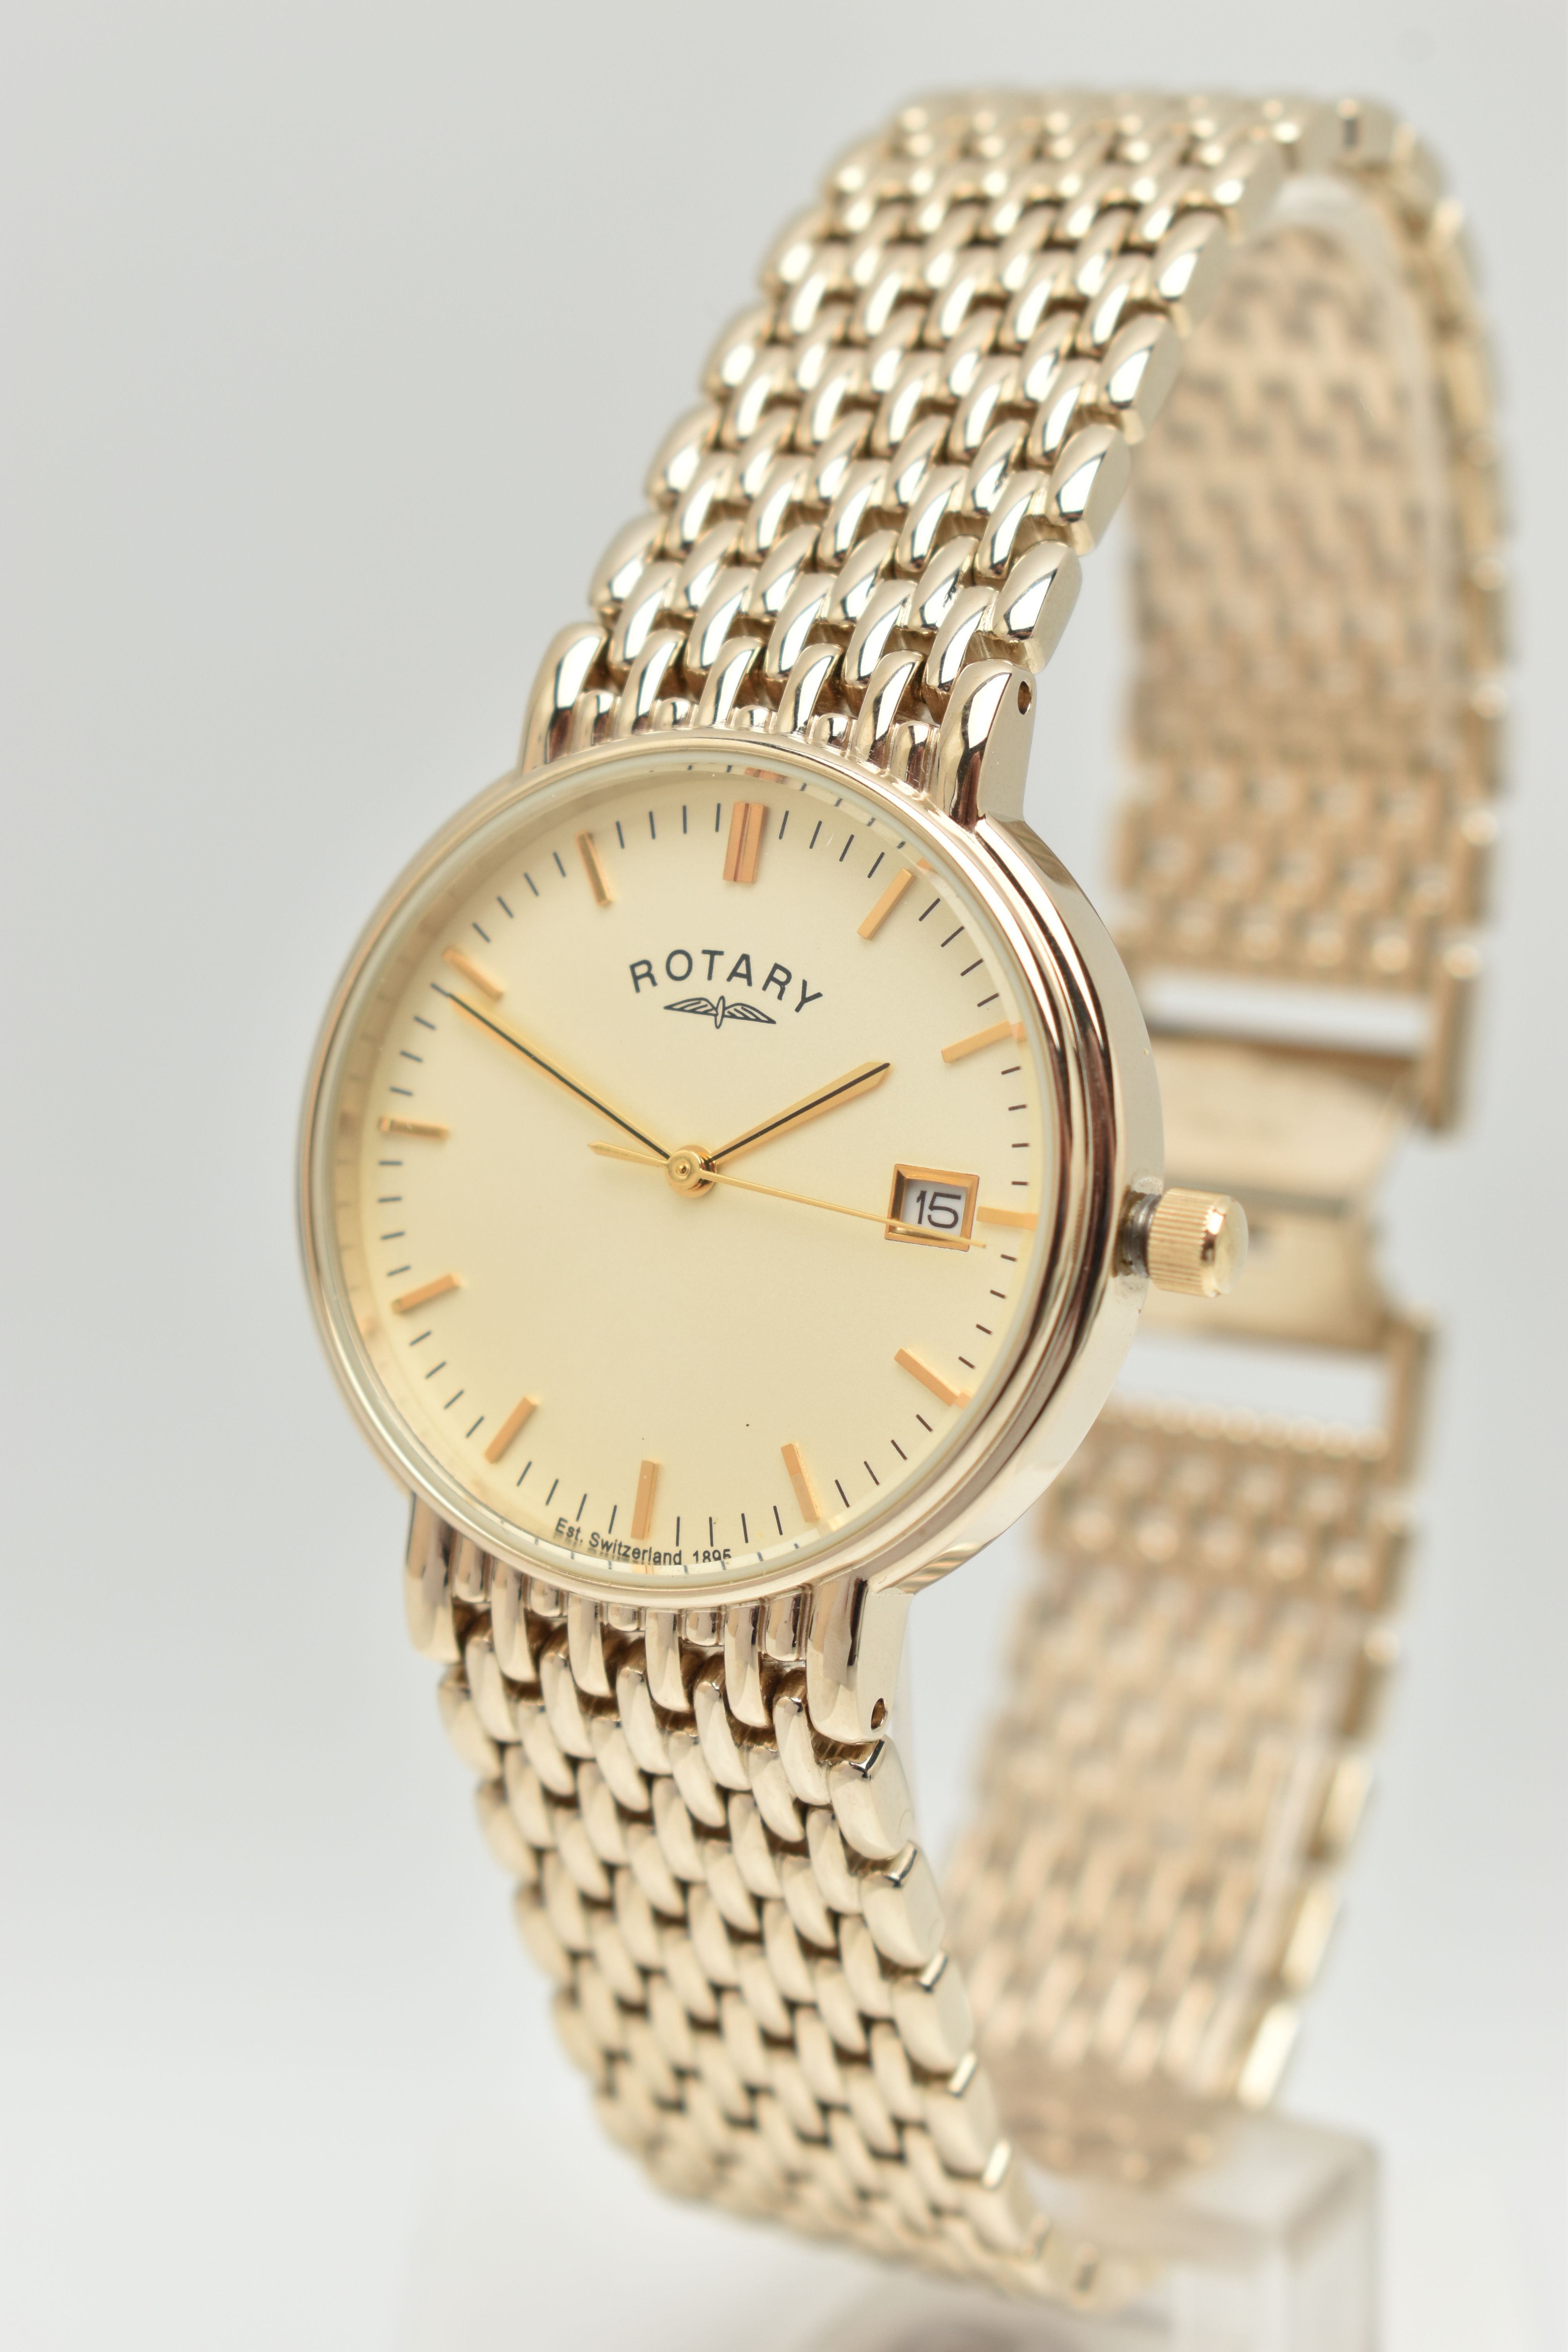 A BOXED 'ROTARY' WRISTWATCH, quartz movement, round gold dial signed 'Rotary', baton makers, date - Image 3 of 6